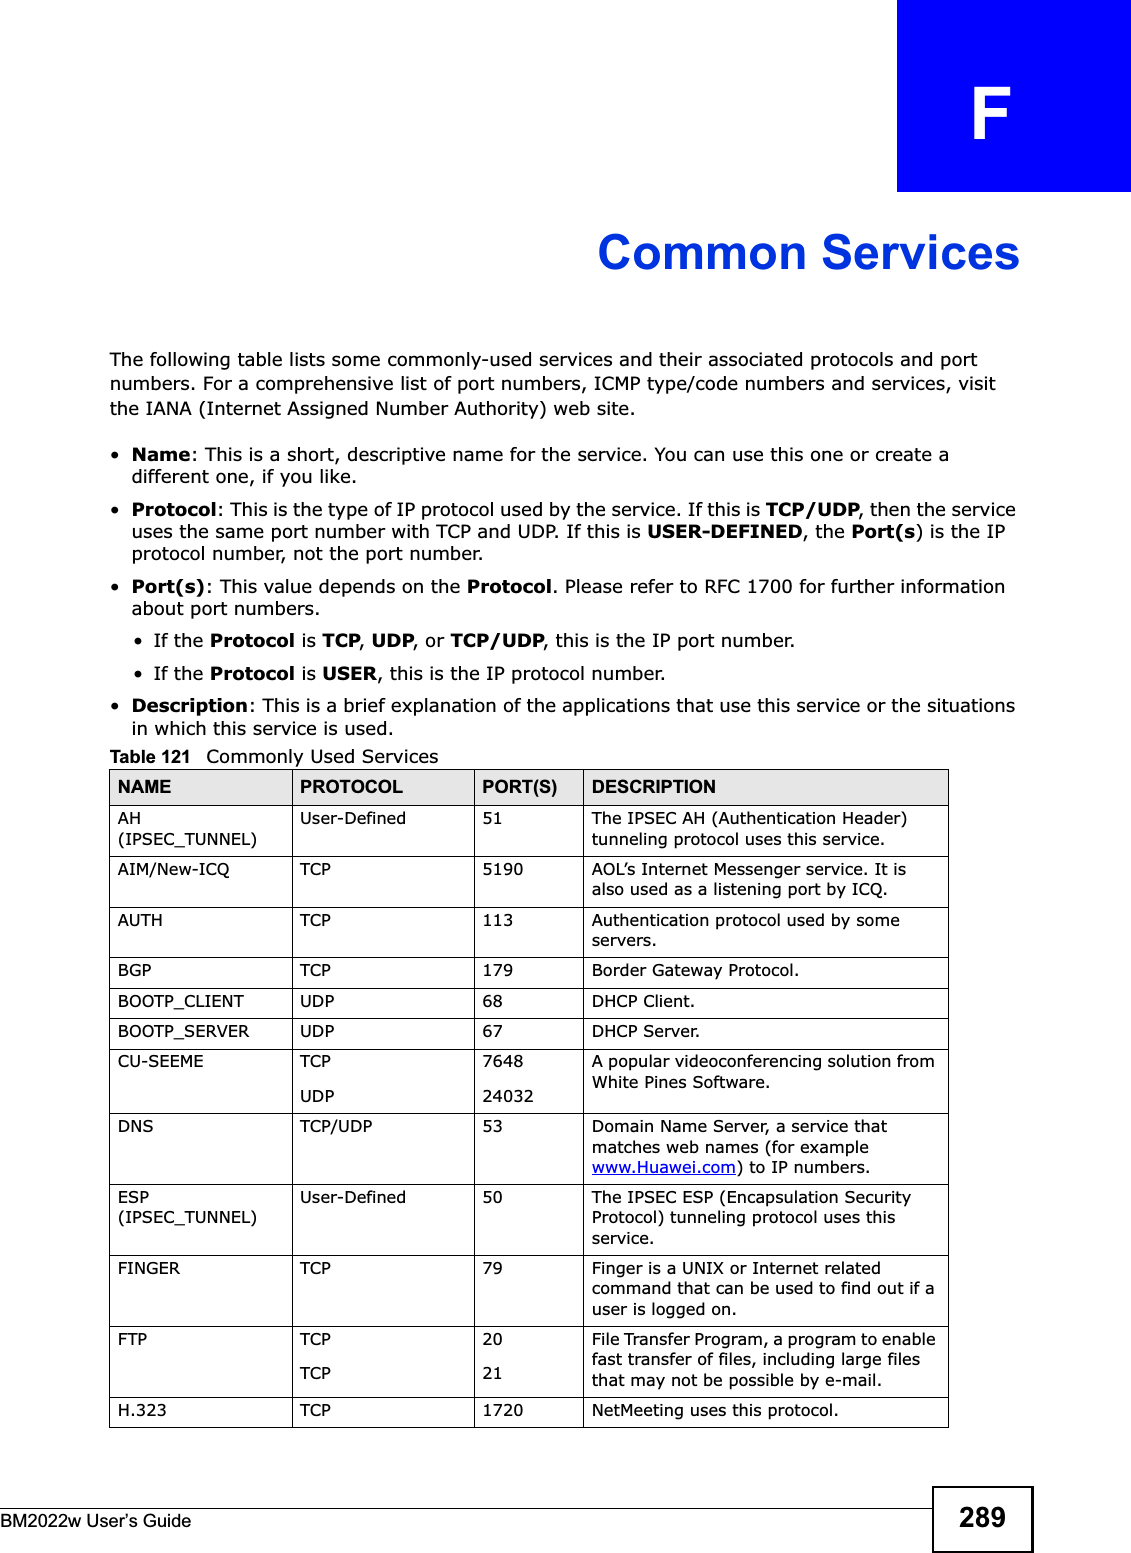 BM2022w User’s Guide 289APPENDIX   FCommon ServicesThe following table lists some commonly-used services and their associated protocols and port numbers. For a comprehensive list of port numbers, ICMP type/code numbers and services, visit the IANA (Internet Assigned Number Authority) web site. •Name: This is a short, descriptive name for the service. You can use this one or create a different one, if you like.•Protocol: This is the type of IP protocol used by the service. If this is TCP/UDP, then the service uses the same port number with TCP and UDP. If this is USER-DEFINED, the Port(s) is the IP protocol number, not the port number.•Port(s): This value depends on the Protocol. Please refer to RFC 1700 for further information about port numbers.•If the Protocol is TCP,UDP, or TCP/UDP, this is the IP port number.•If the Protocol is USER, this is the IP protocol number.•Description: This is a brief explanation of the applications that use this service or the situations in which this service is used.Table 121   Commonly Used ServicesNAME PROTOCOL PORT(S) DESCRIPTIONAH (IPSEC_TUNNEL)User-Defined 51 The IPSEC AH (Authentication Header) tunneling protocol uses this service.AIM/New-ICQ TCP 5190 AOL’s Internet Messenger service. It is also used as a listening port by ICQ.AUTH TCP 113 Authentication protocol used by some servers.BGP TCP 179 Border Gateway Protocol.BOOTP_CLIENT UDP 68 DHCP Client.BOOTP_SERVER UDP 67 DHCP Server.CU-SEEME TCPUDP764824032A popular videoconferencing solution from White Pines Software.DNS TCP/UDP 53 Domain Name Server, a service that matches web names (for example www.Huawei.com) to IP numbers.ESP (IPSEC_TUNNEL)User-Defined 50 The IPSEC ESP (Encapsulation Security Protocol) tunneling protocol uses this service.FINGER TCP 79 Finger is a UNIX or Internet related command that can be used to find out if a user is logged on.FTP TCPTCP2021File Transfer Program, a program to enable fast transfer of files, including large files that may not be possible by e-mail.H.323 TCP 1720 NetMeeting uses this protocol.